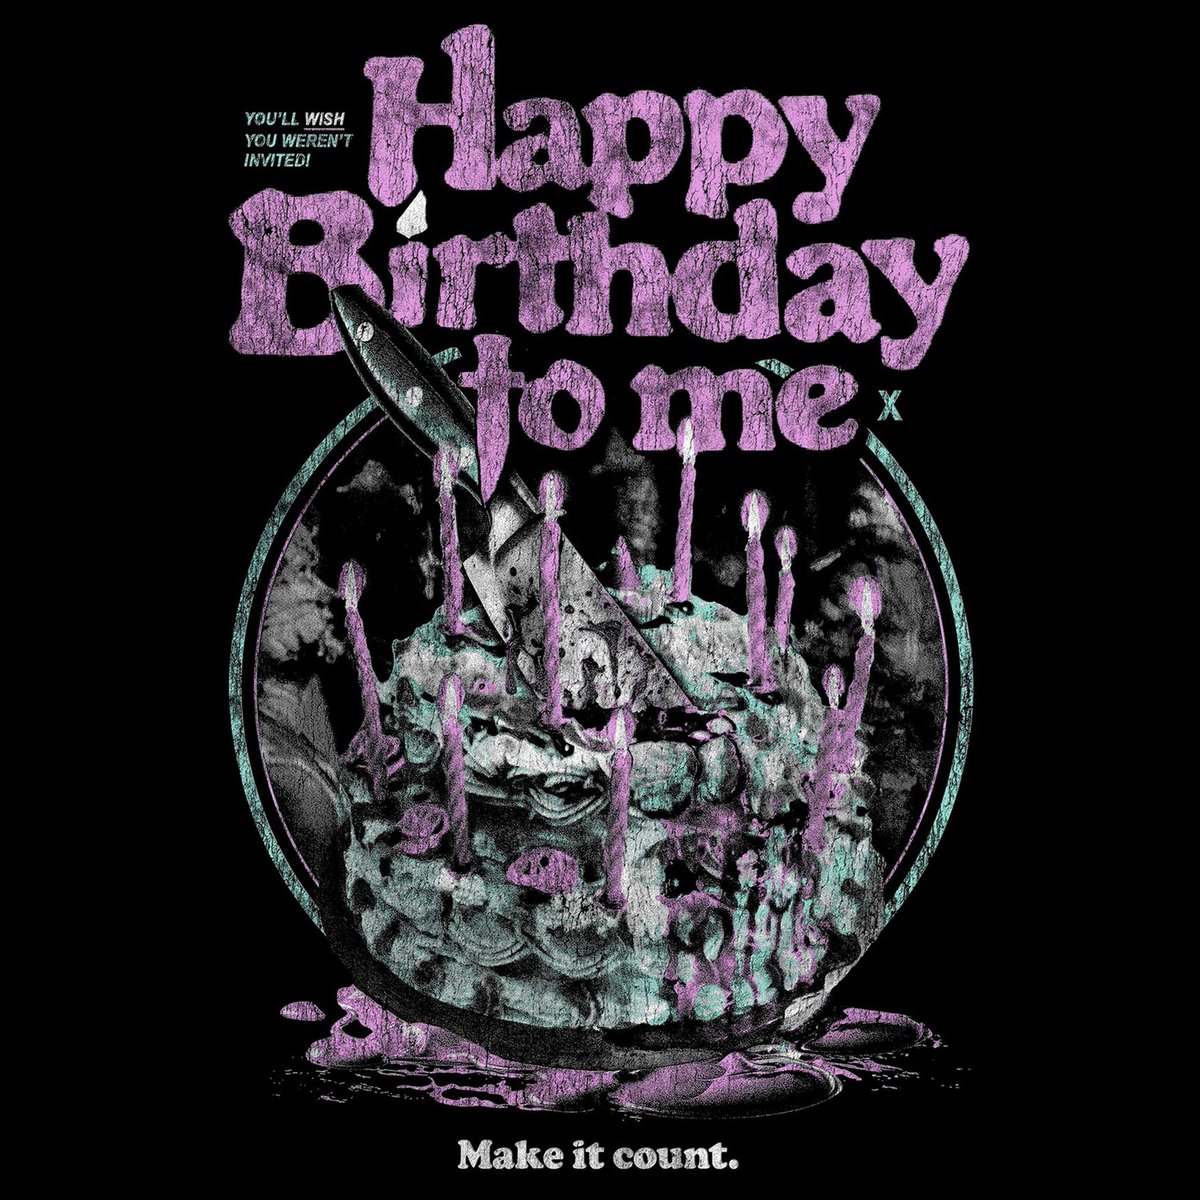 You'll wish you weren't invited to @frightrags's Happy Birthday to Me collection: brokehorrorfan.com/post/750104884… 3 shirts!